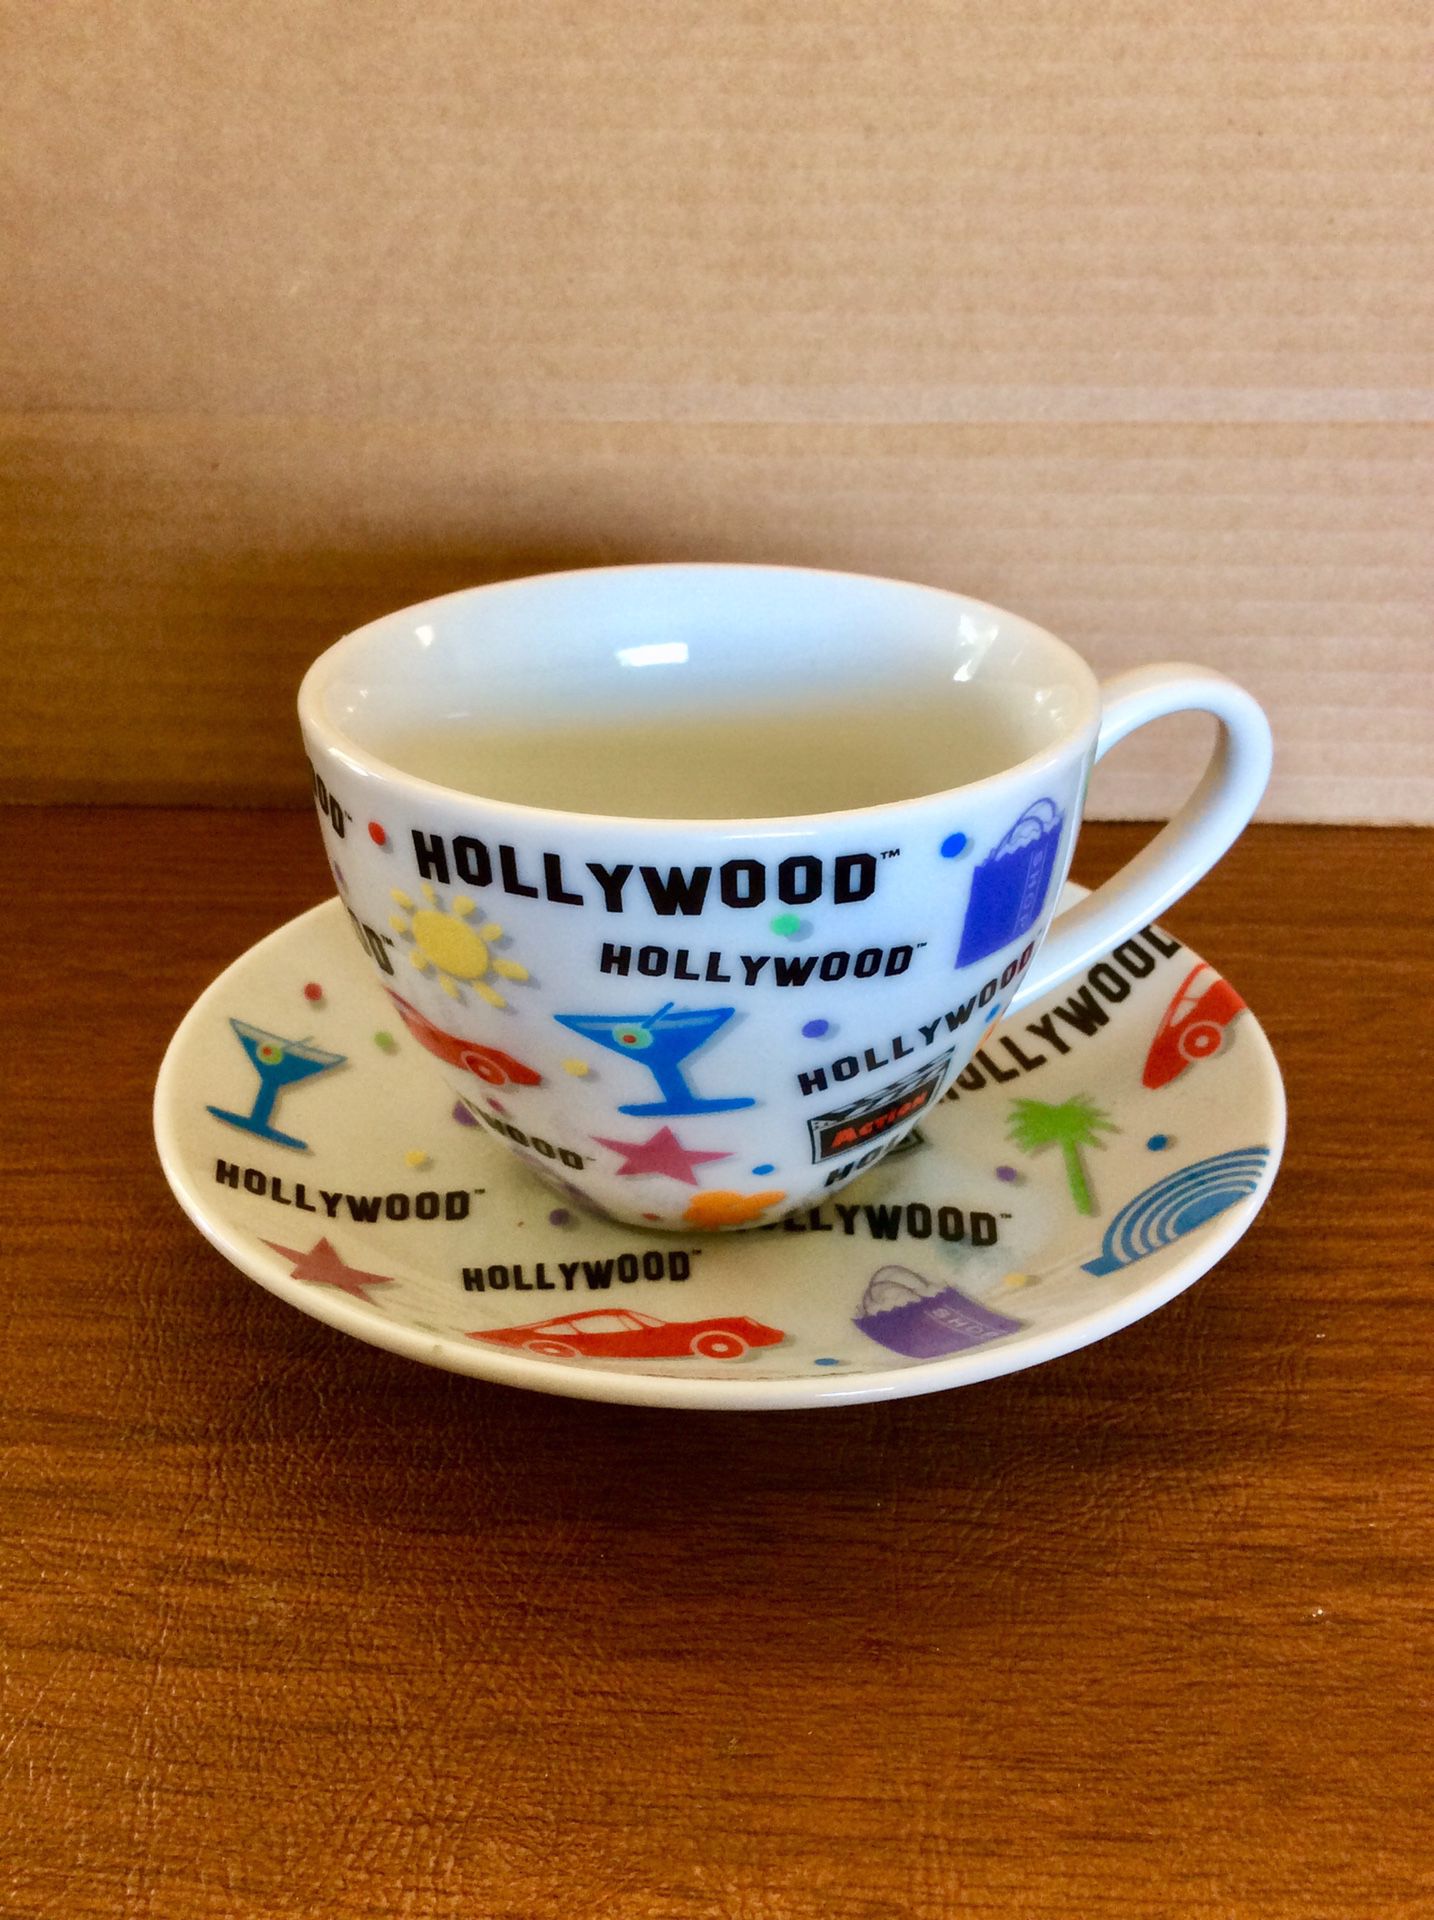 Hollywood collectors cup and saucer